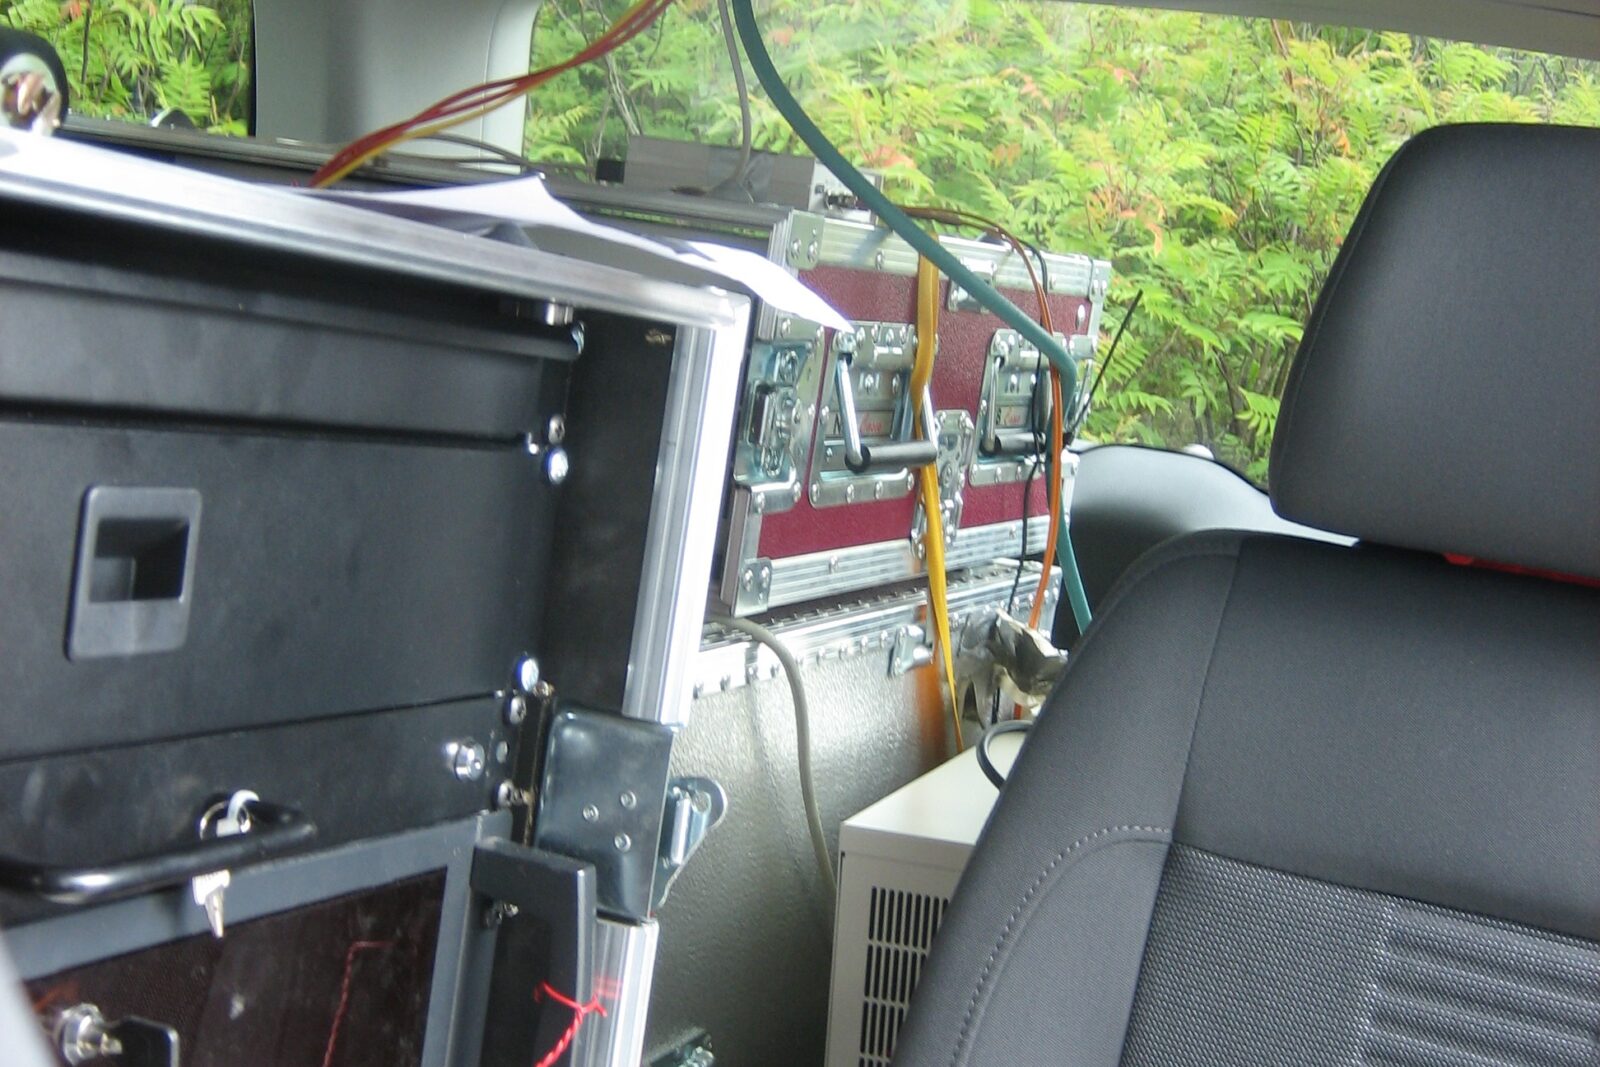 Photo of the portable RF equipment for vehicular communication measurements in the car